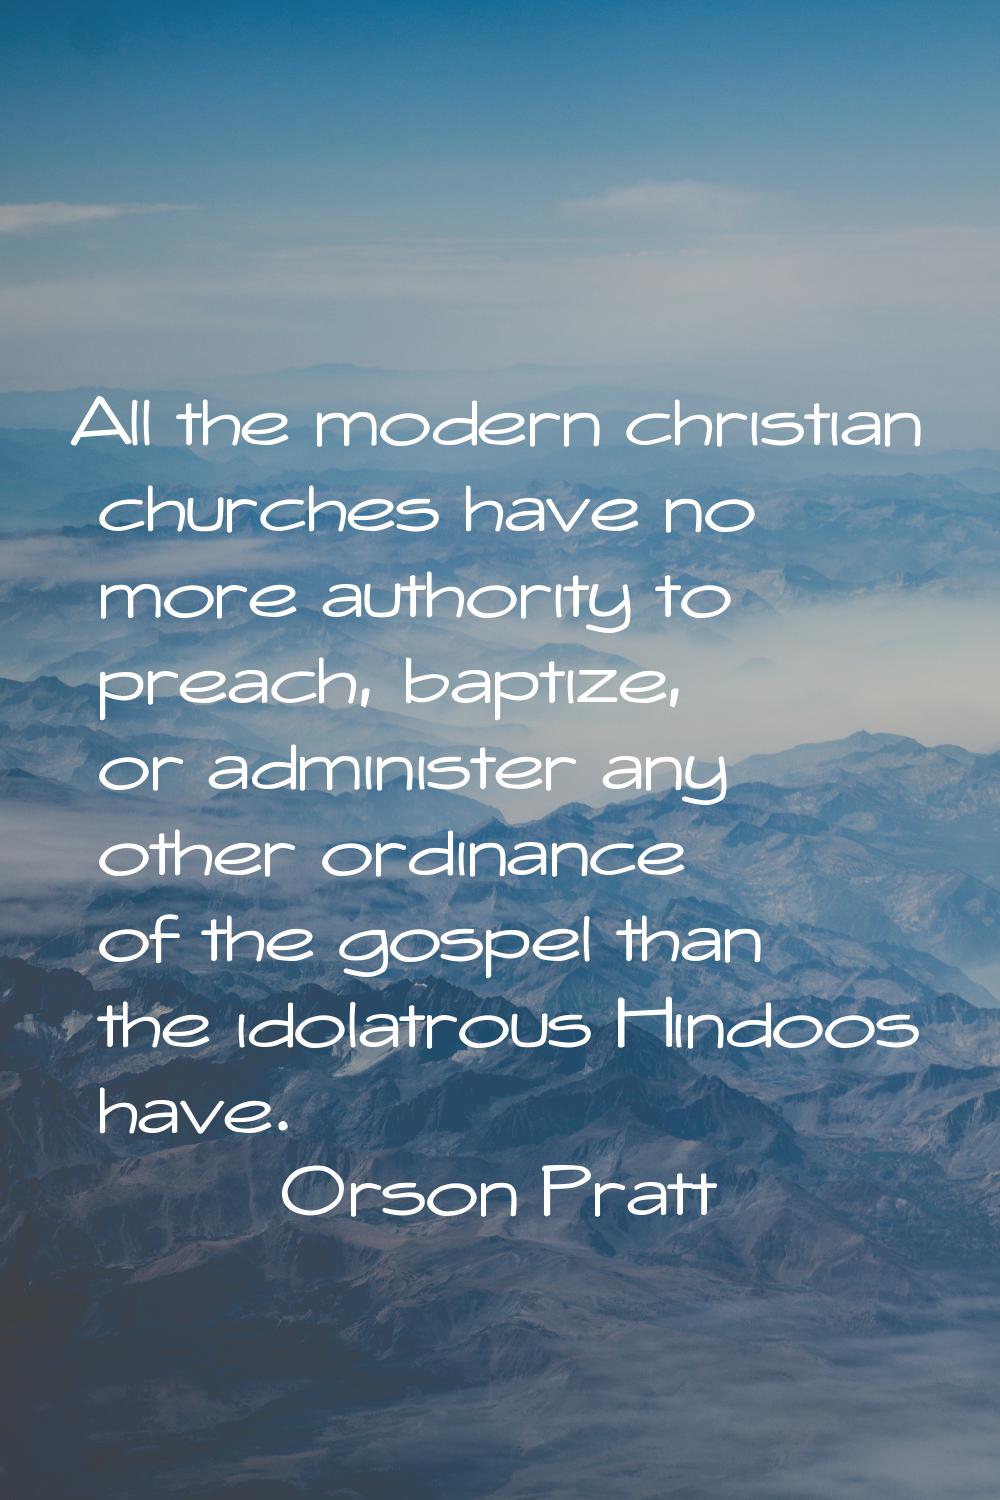 All the modern christian churches have no more authority to preach, baptize, or administer any othe